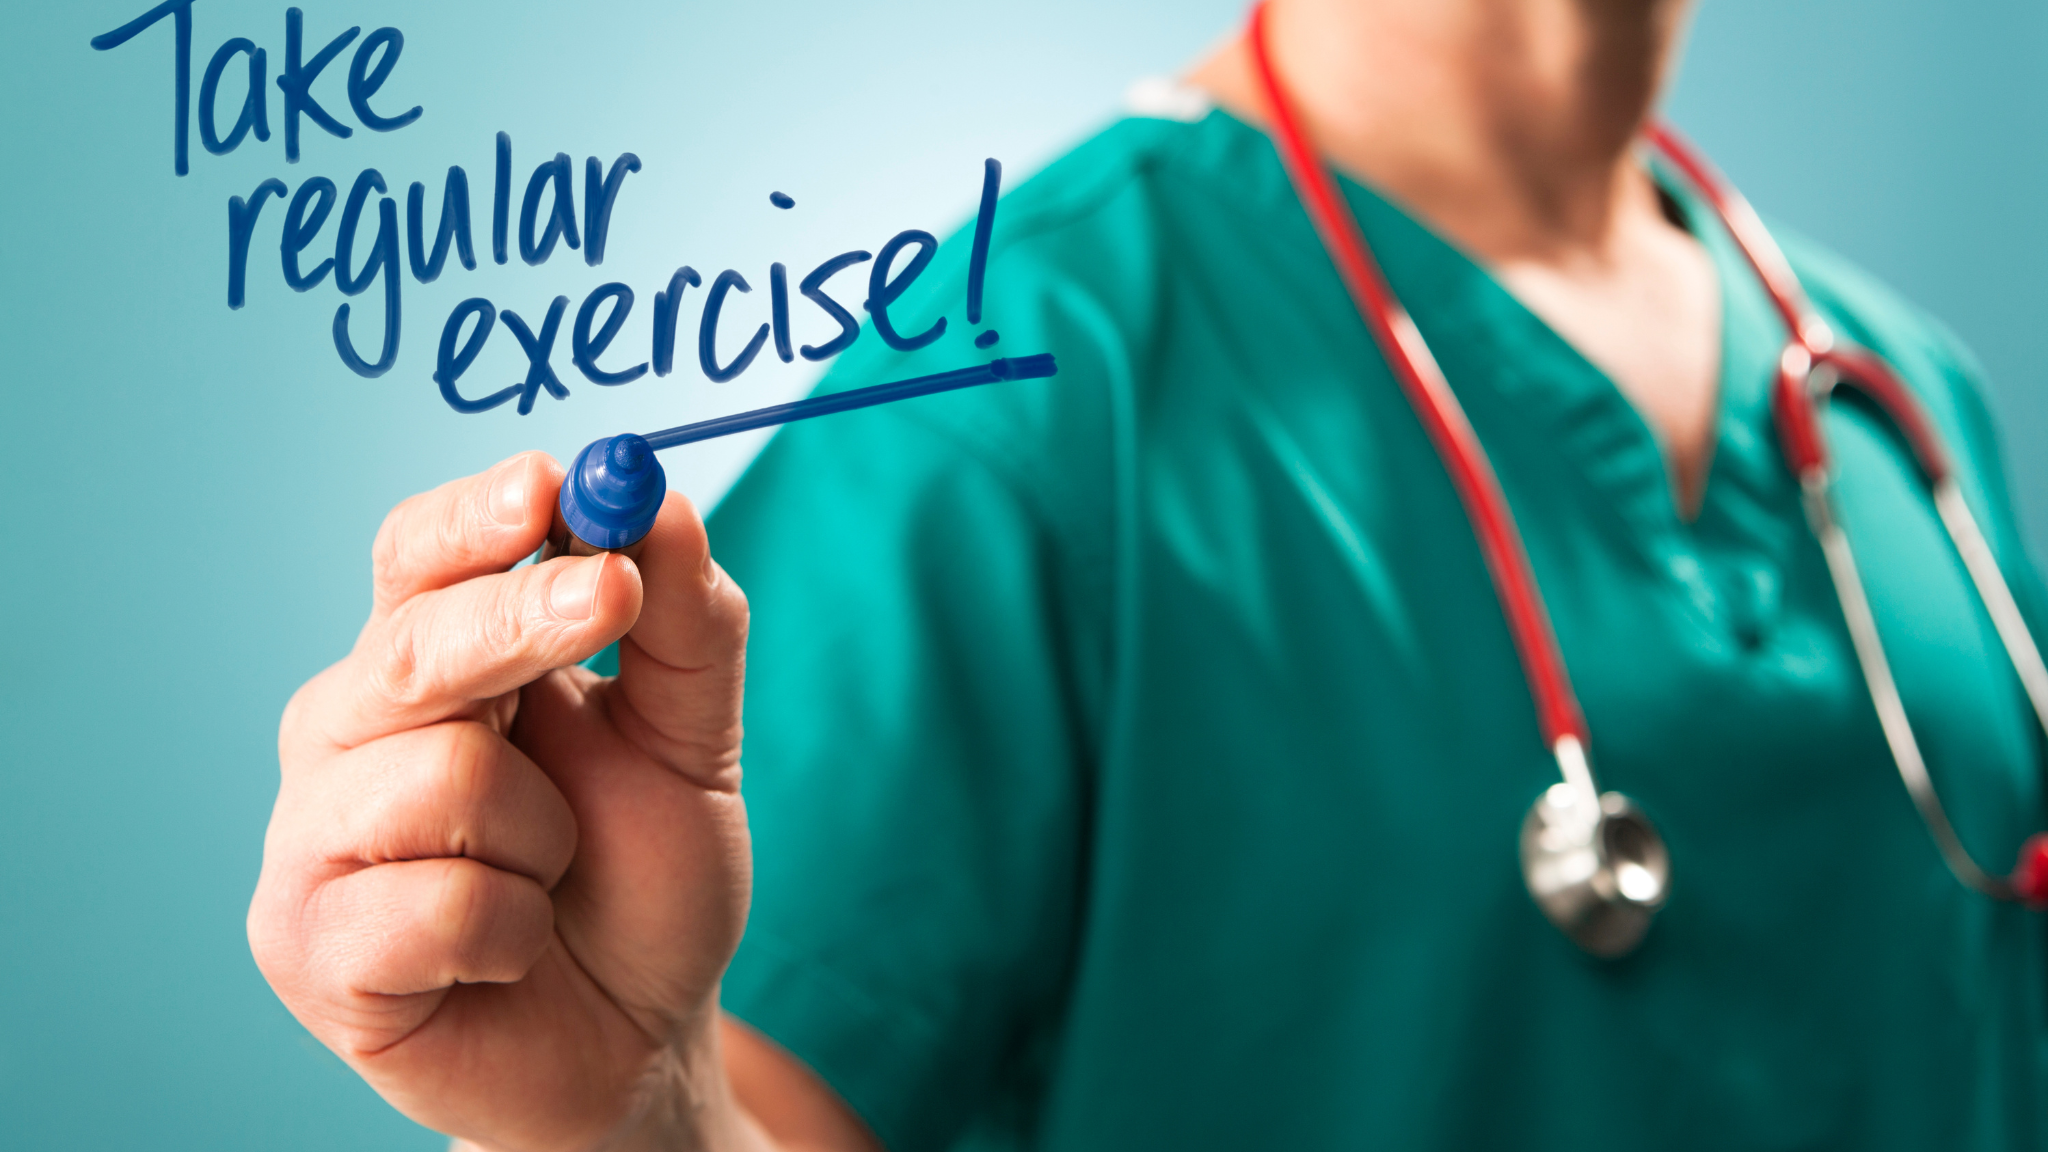 Get Started with Regular Exercise